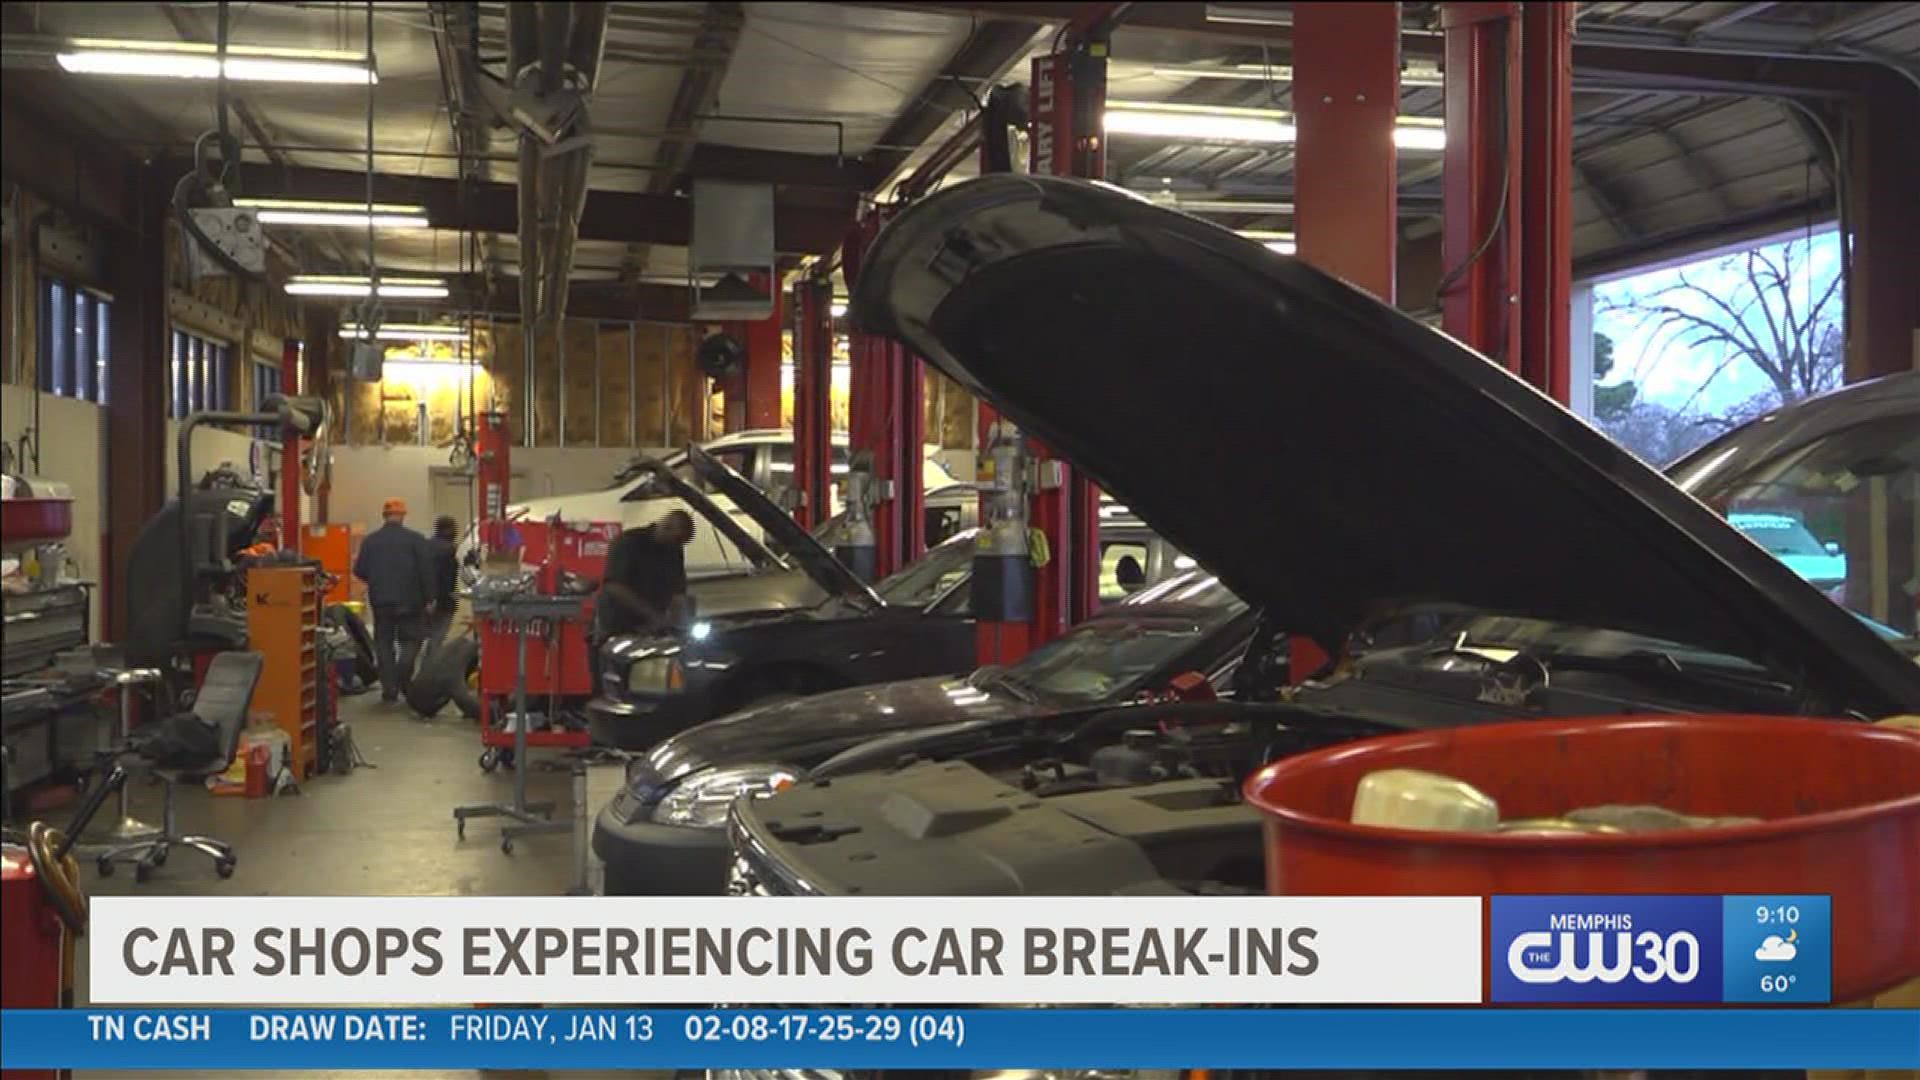 Memphis car theft worsening 500 carjackings and vehicle thefts in 16